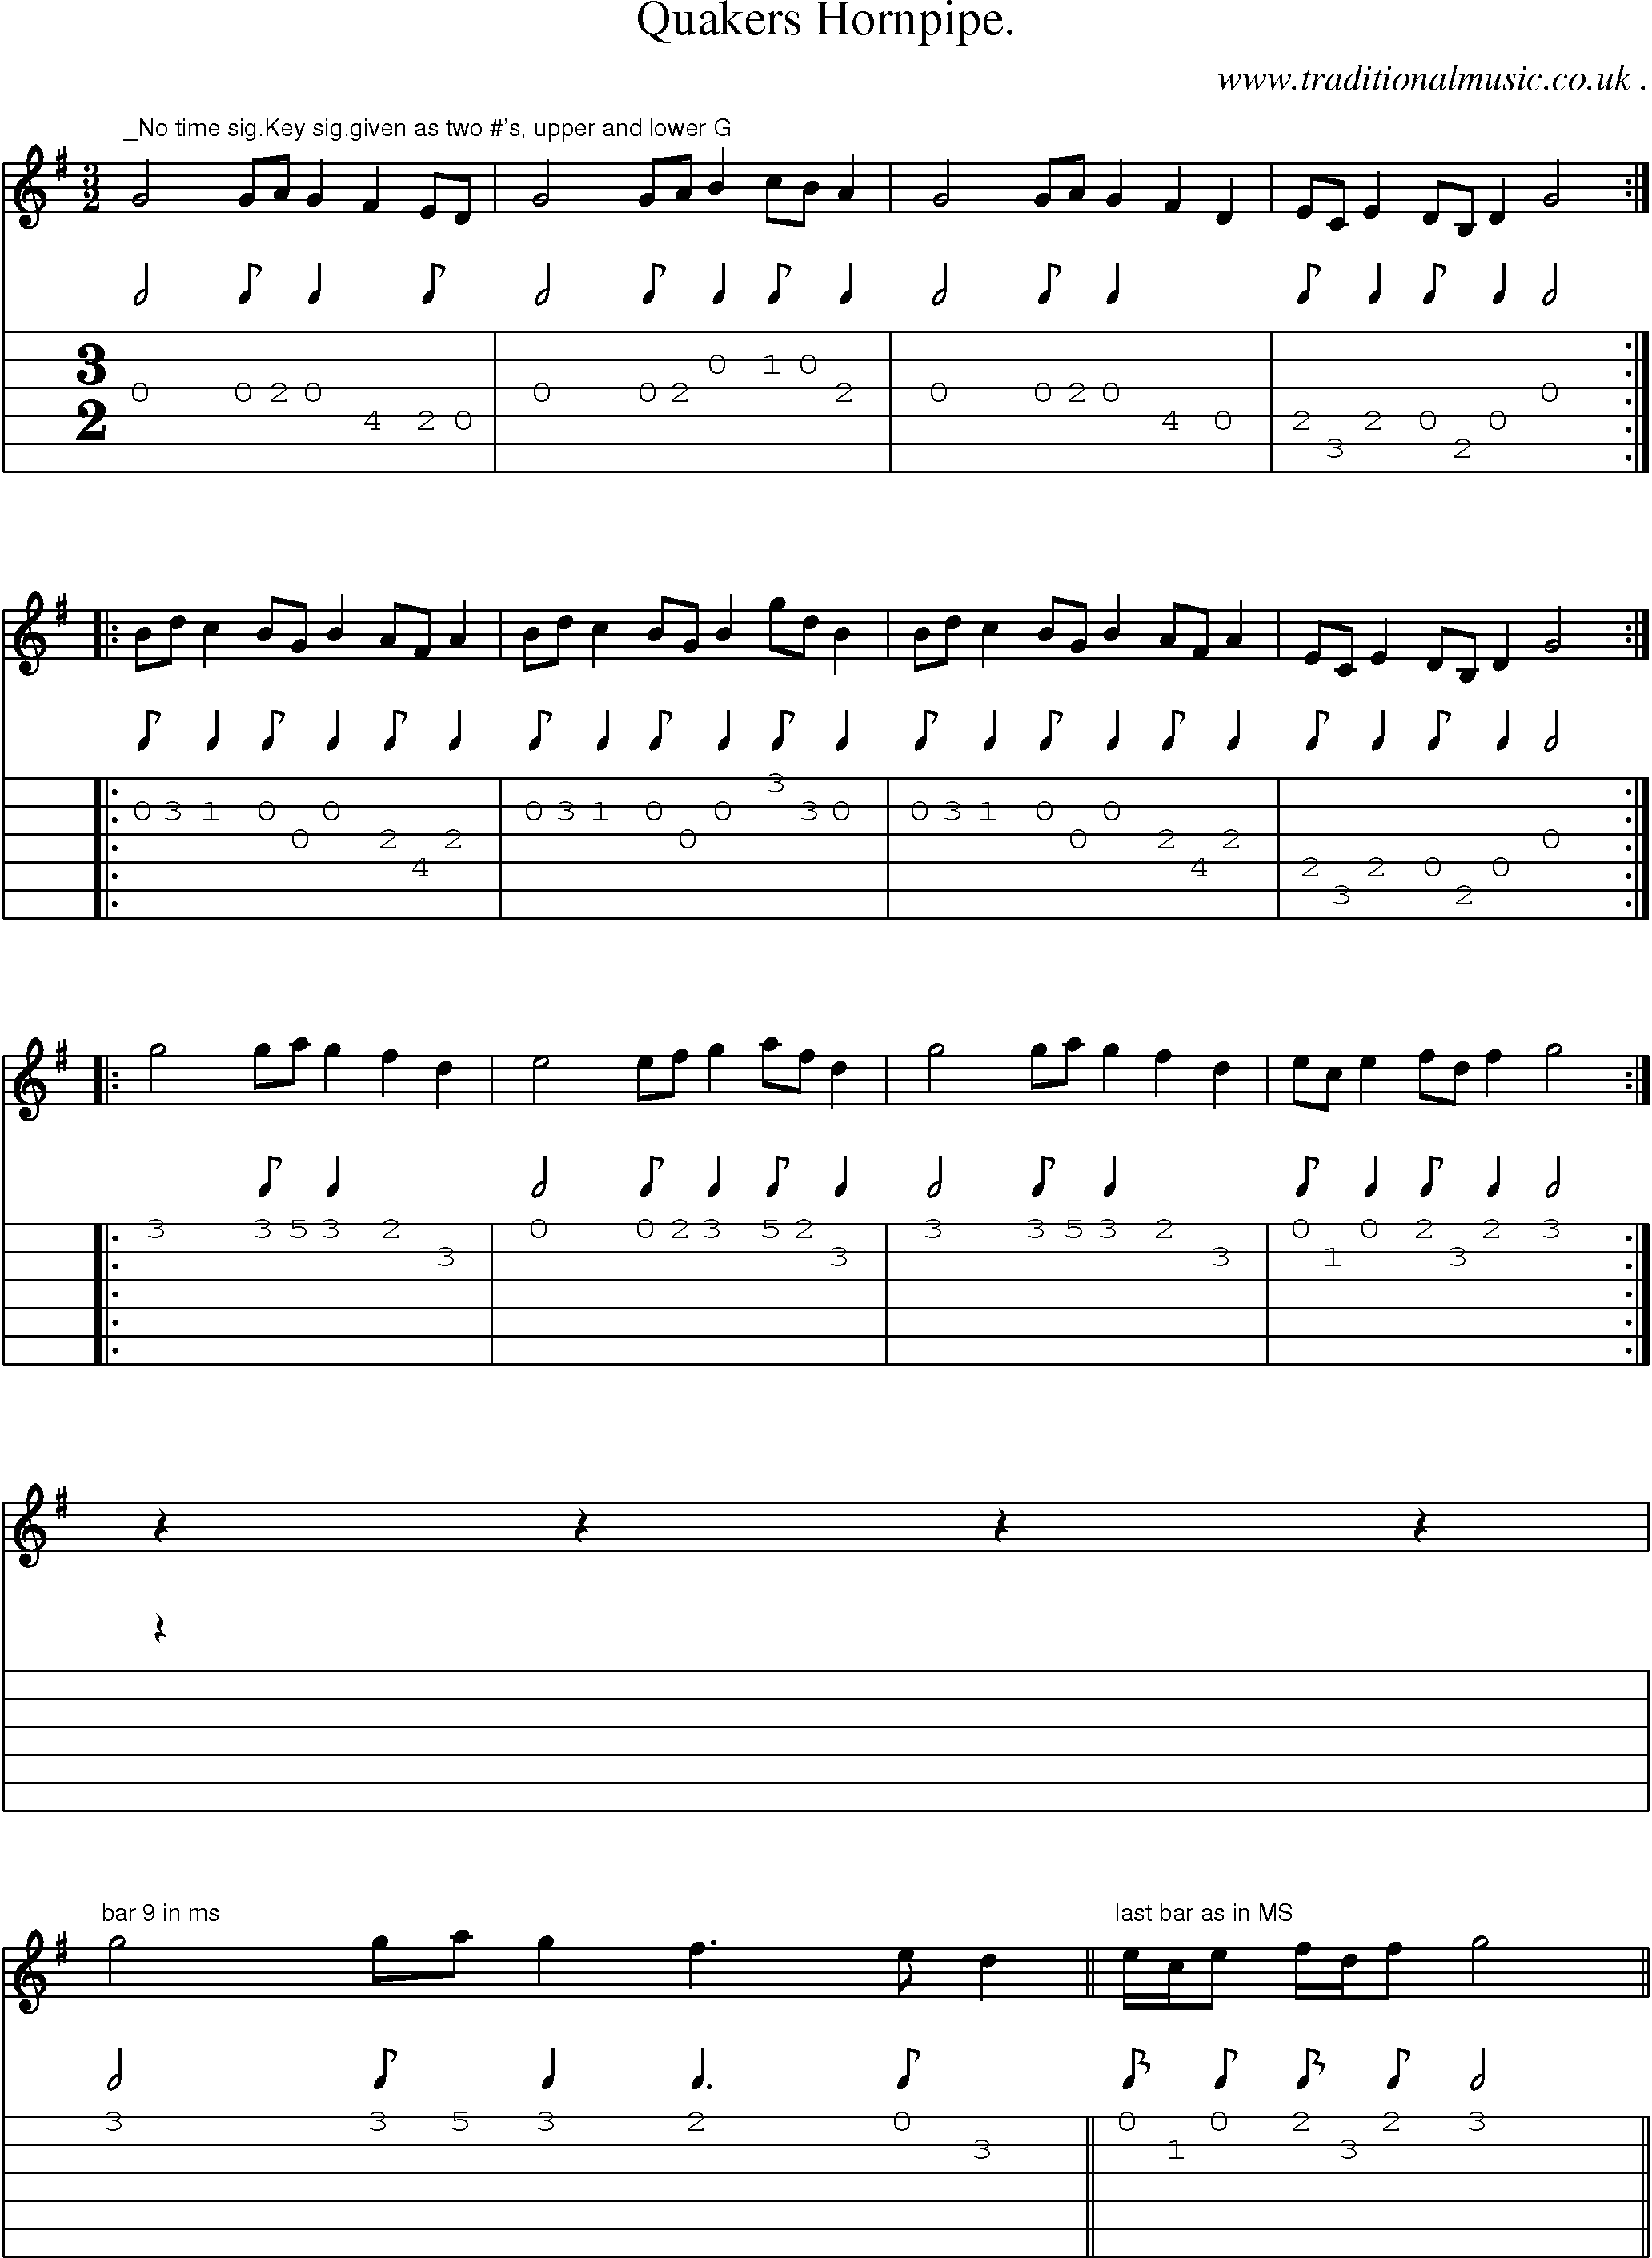 Sheet-Music and Guitar Tabs for Quakers Hornpipe